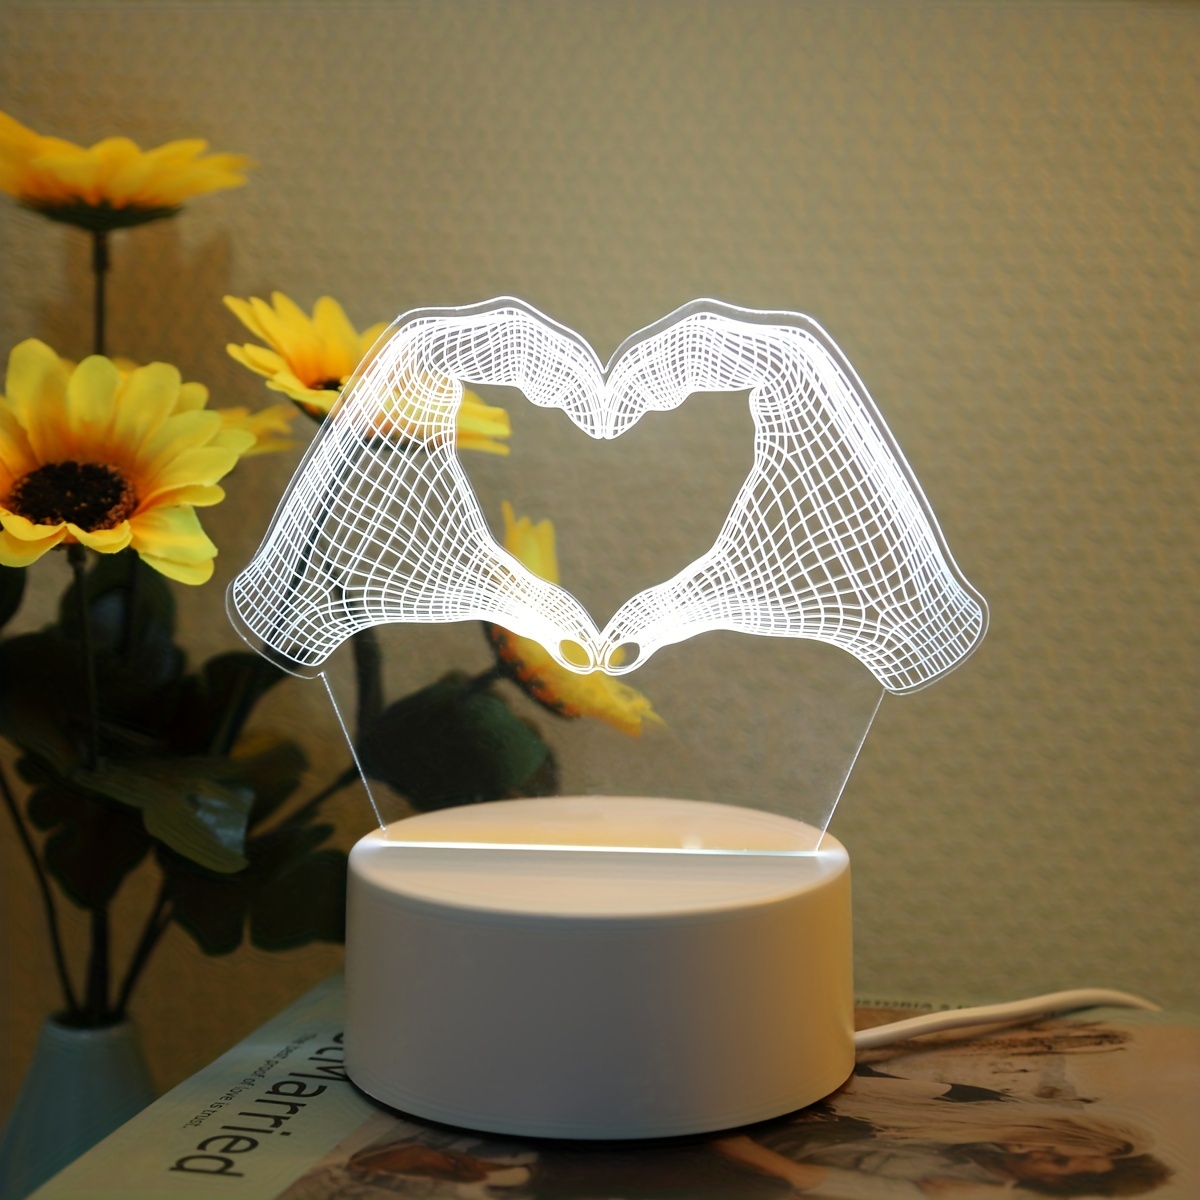 

3d Heart Led Lamp - Usb Powered, Art Deco Desk Lamp, Perfect For Room Or Office, No Battery Included